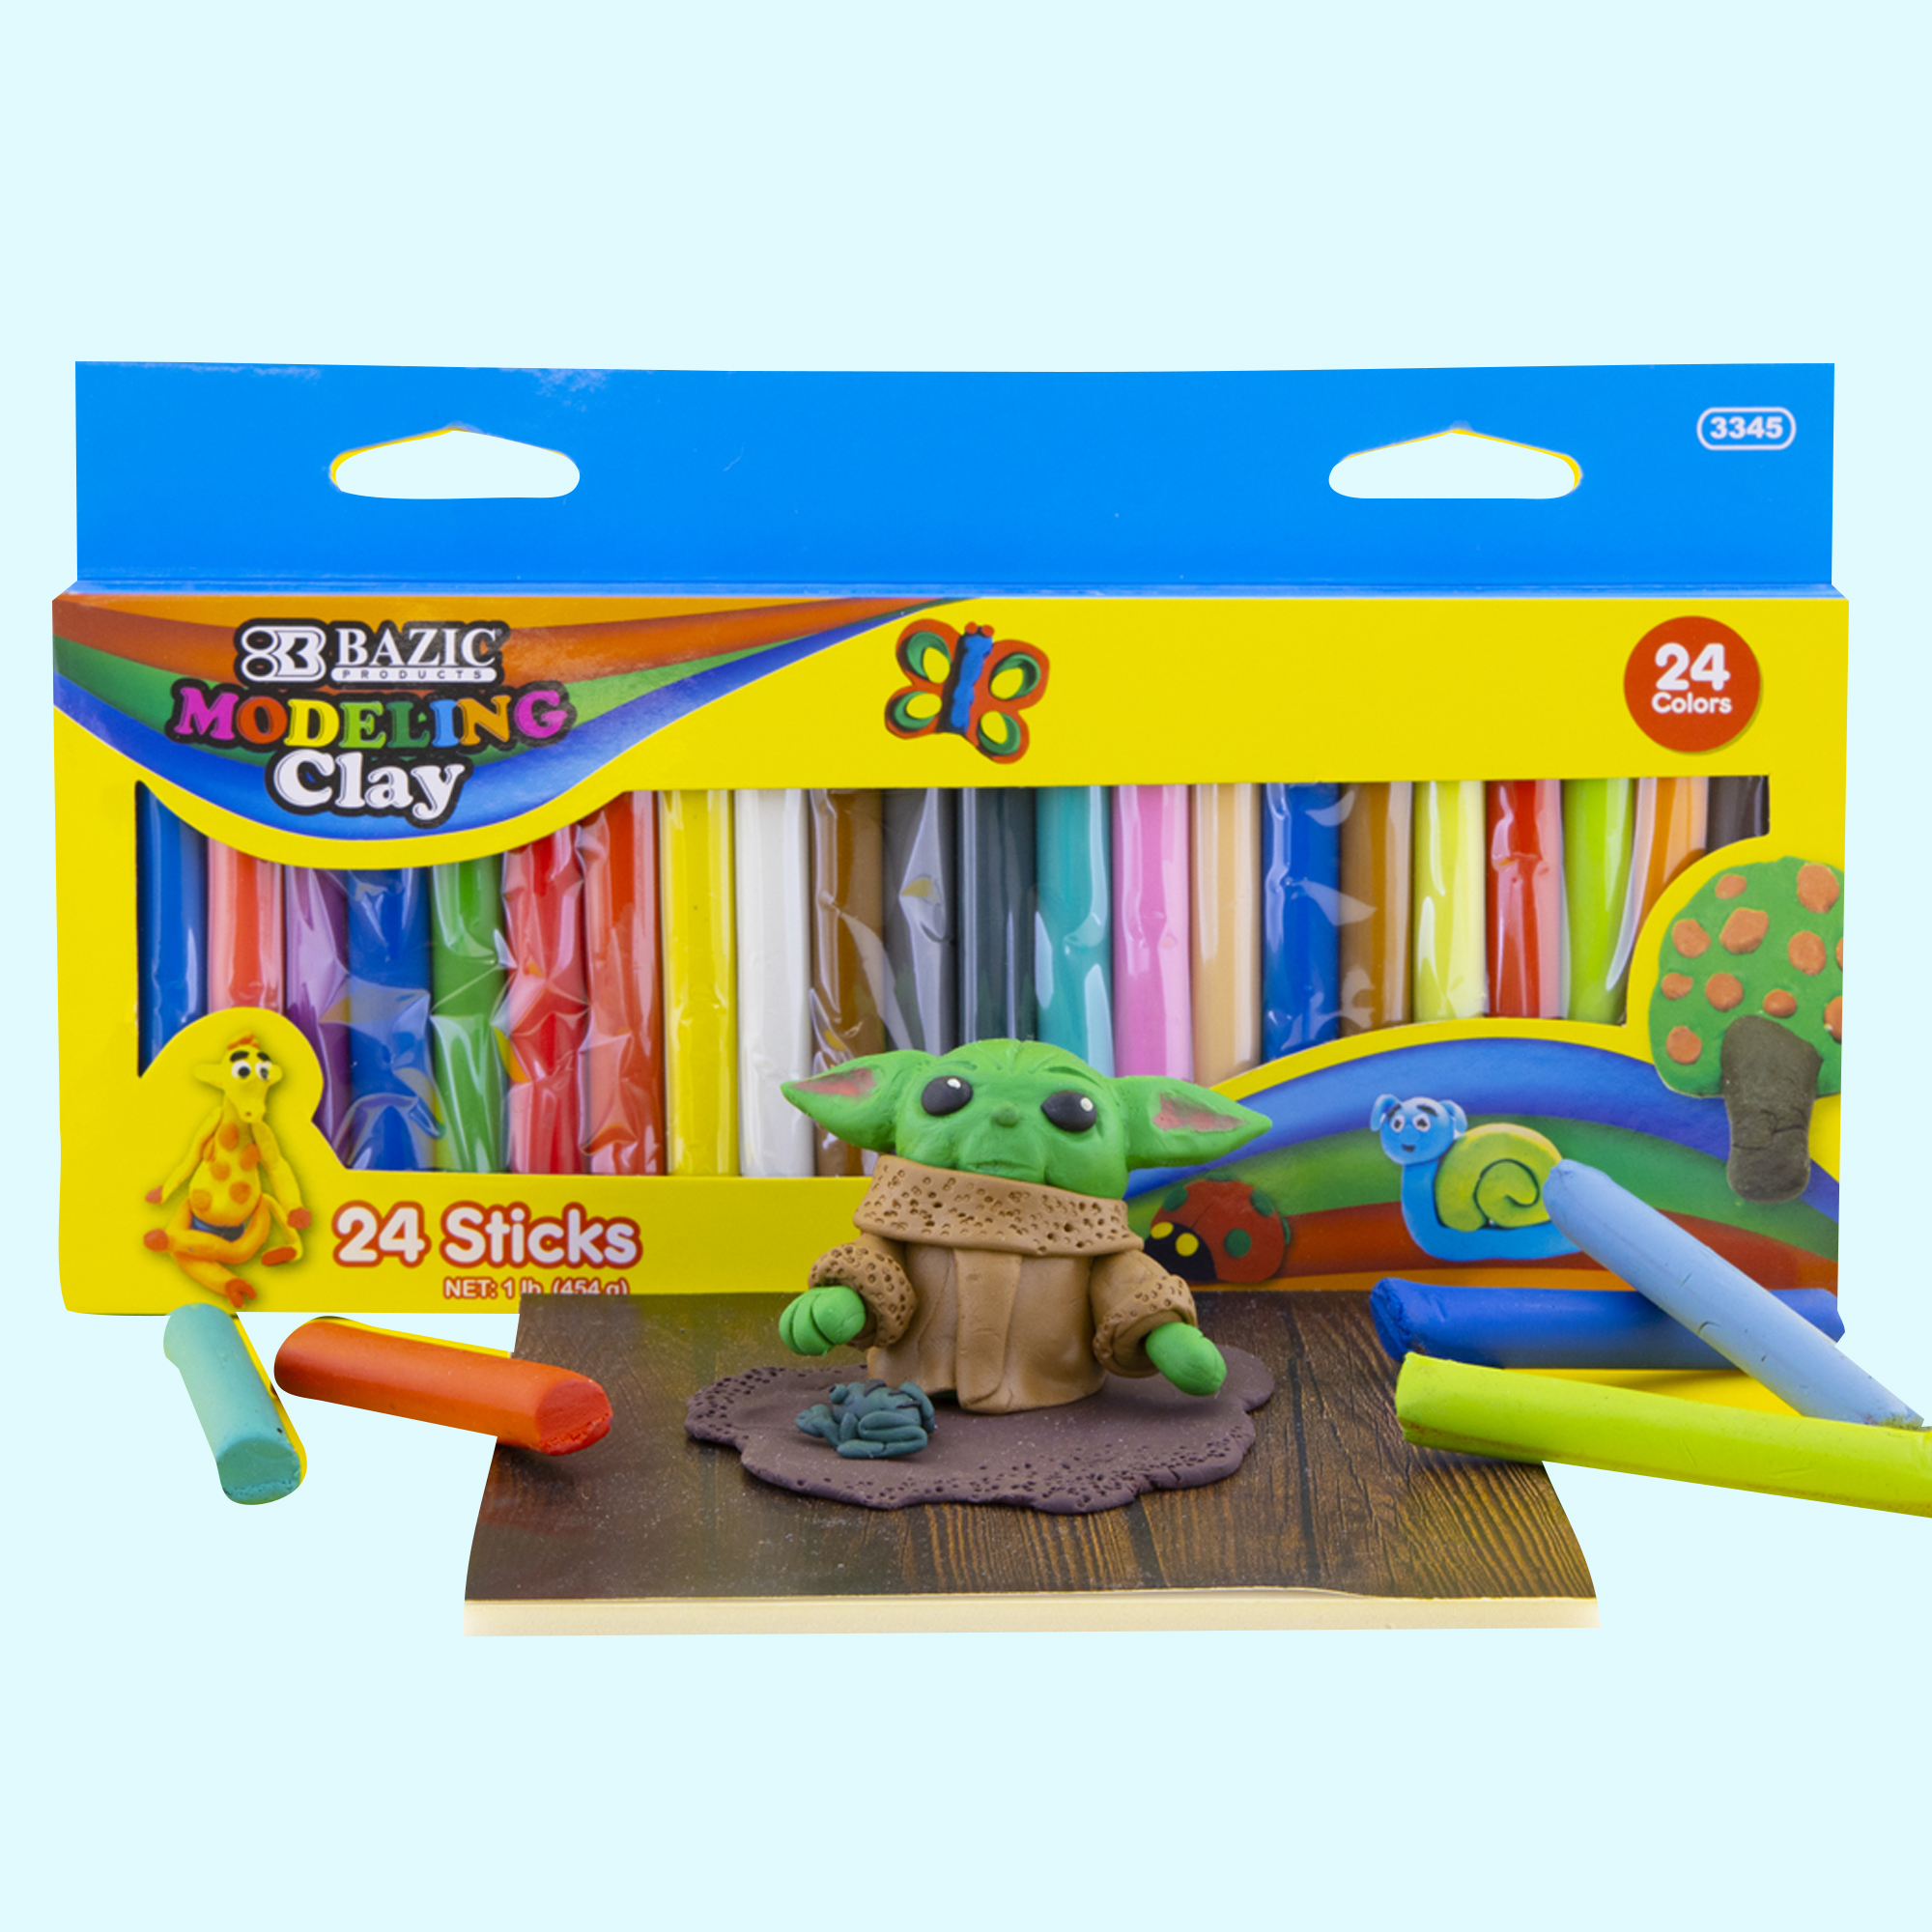 BAZIC 1 lb 24 Color Modeling Clay Sticks Bazic Products